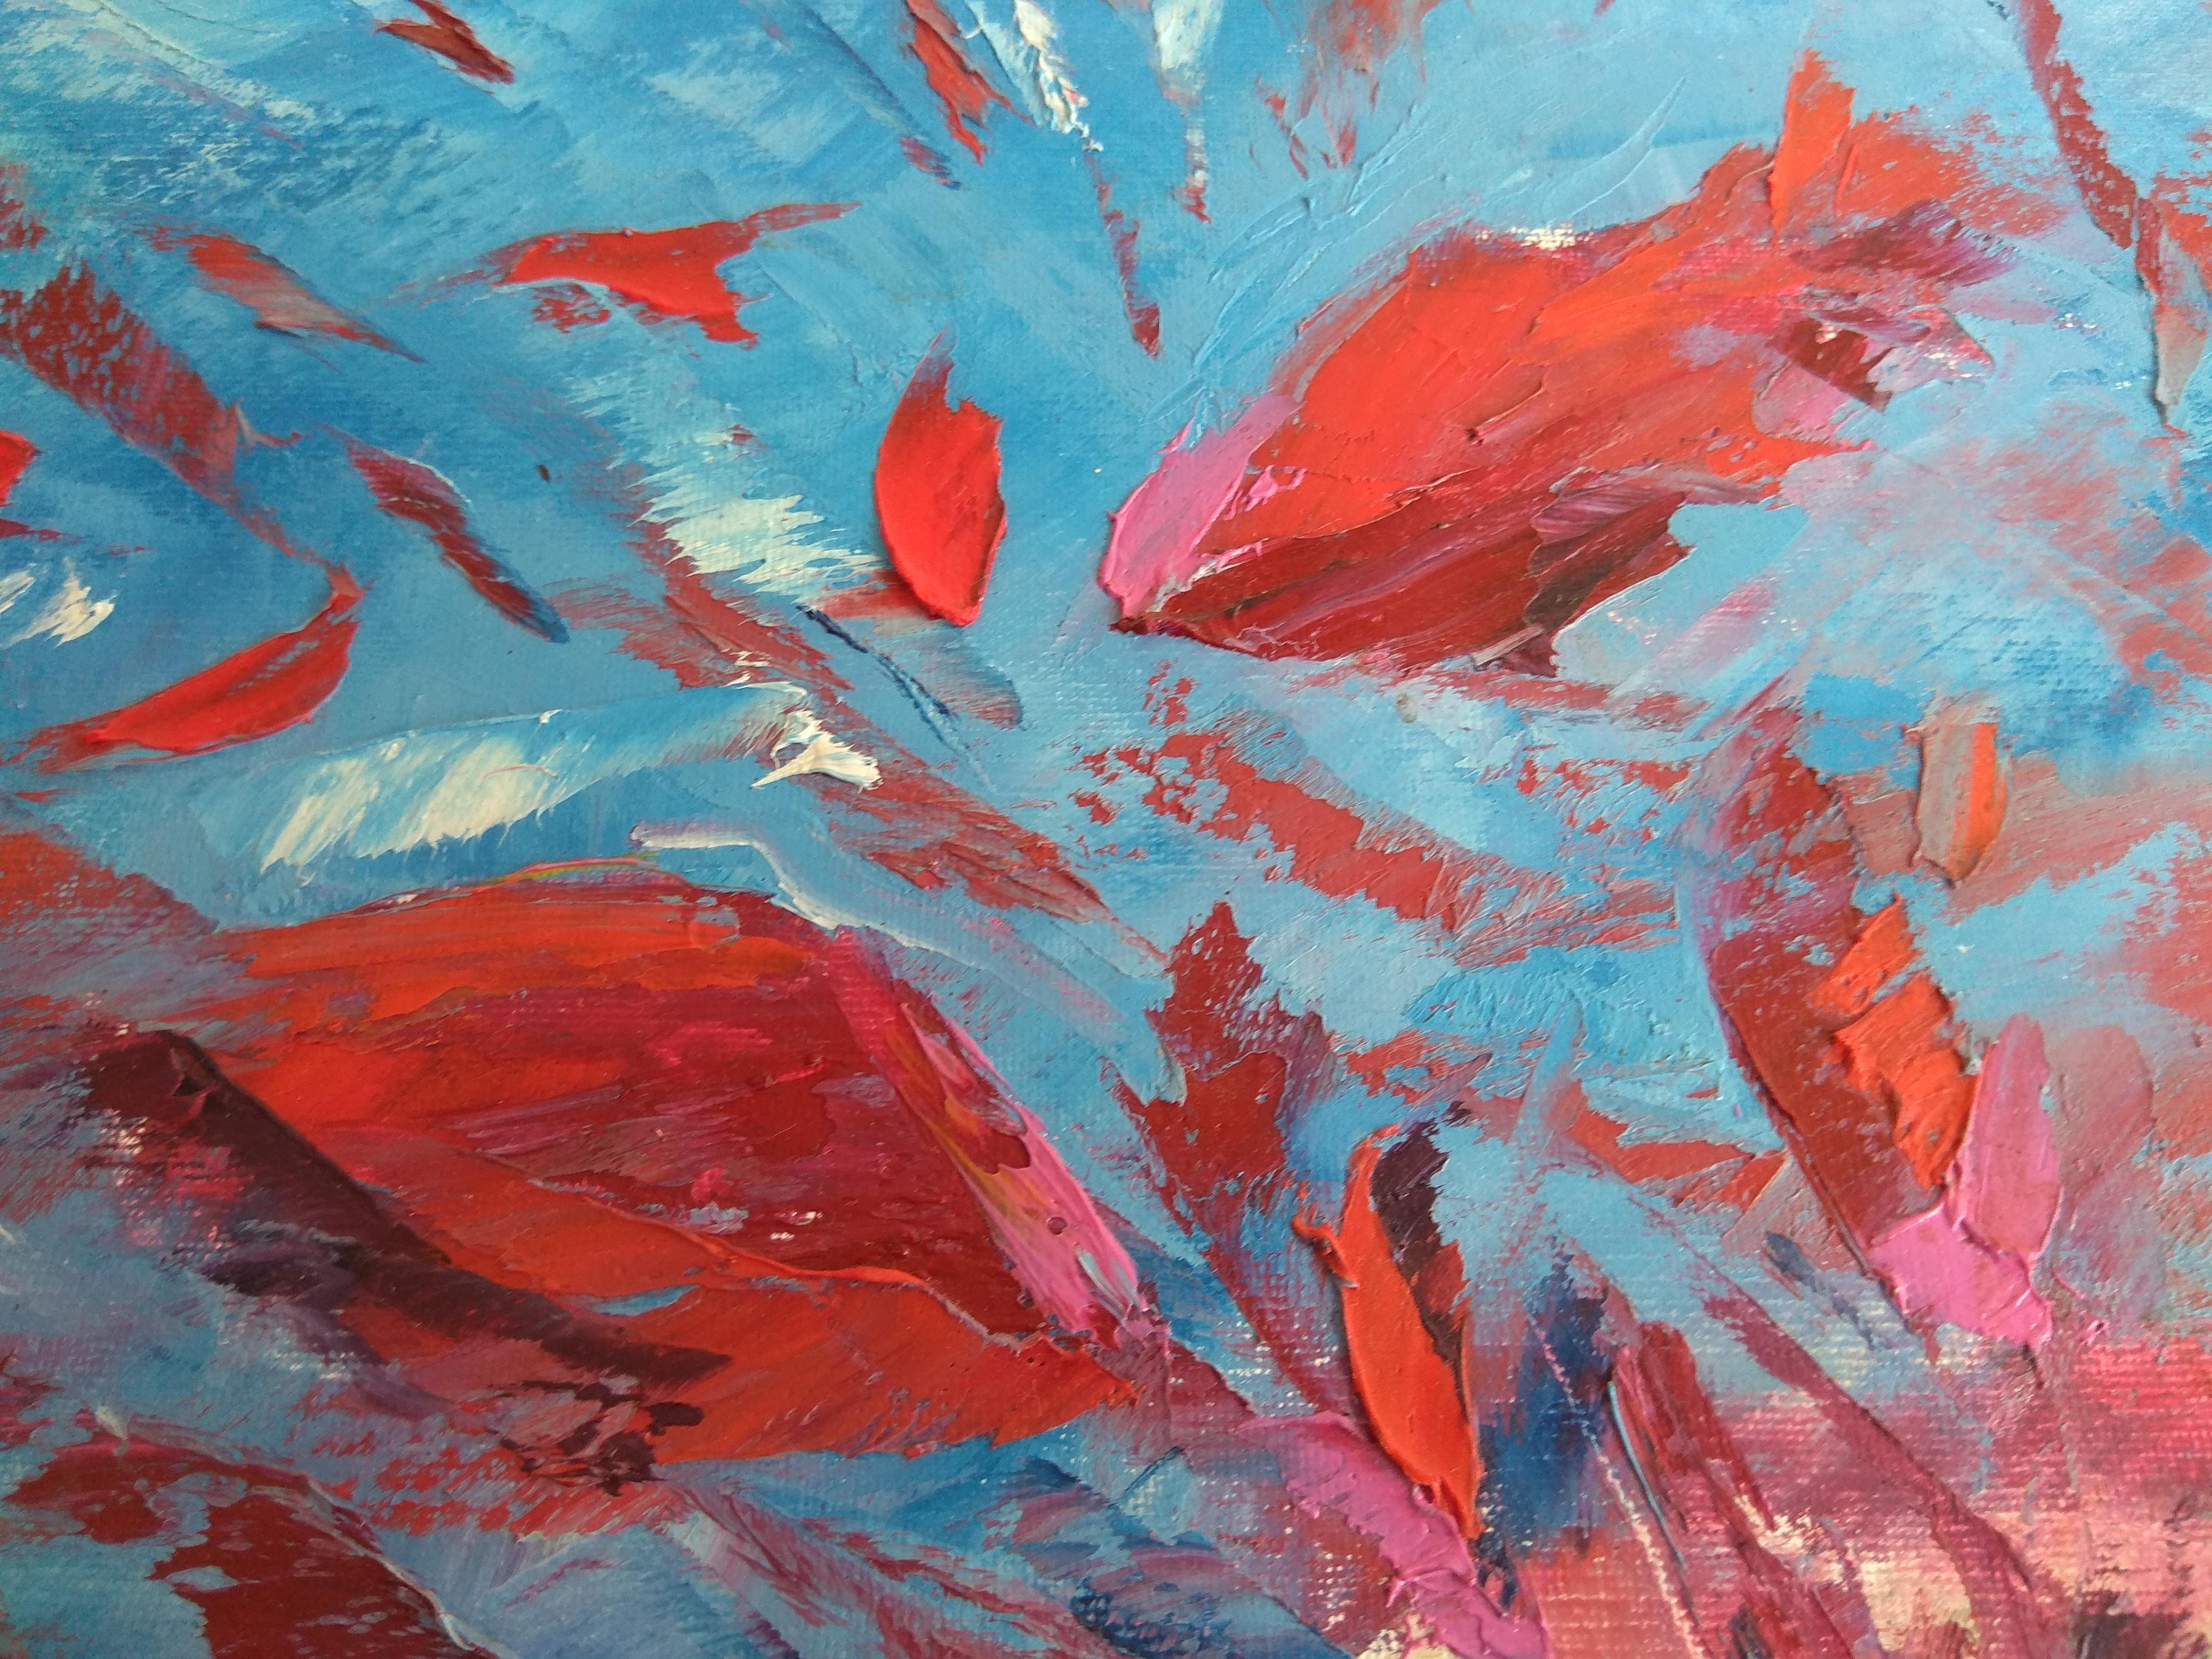 UNDERWATER PAINTING Red Expression was made underwater - Abstract Impressionist Painting by Olga Nikitina